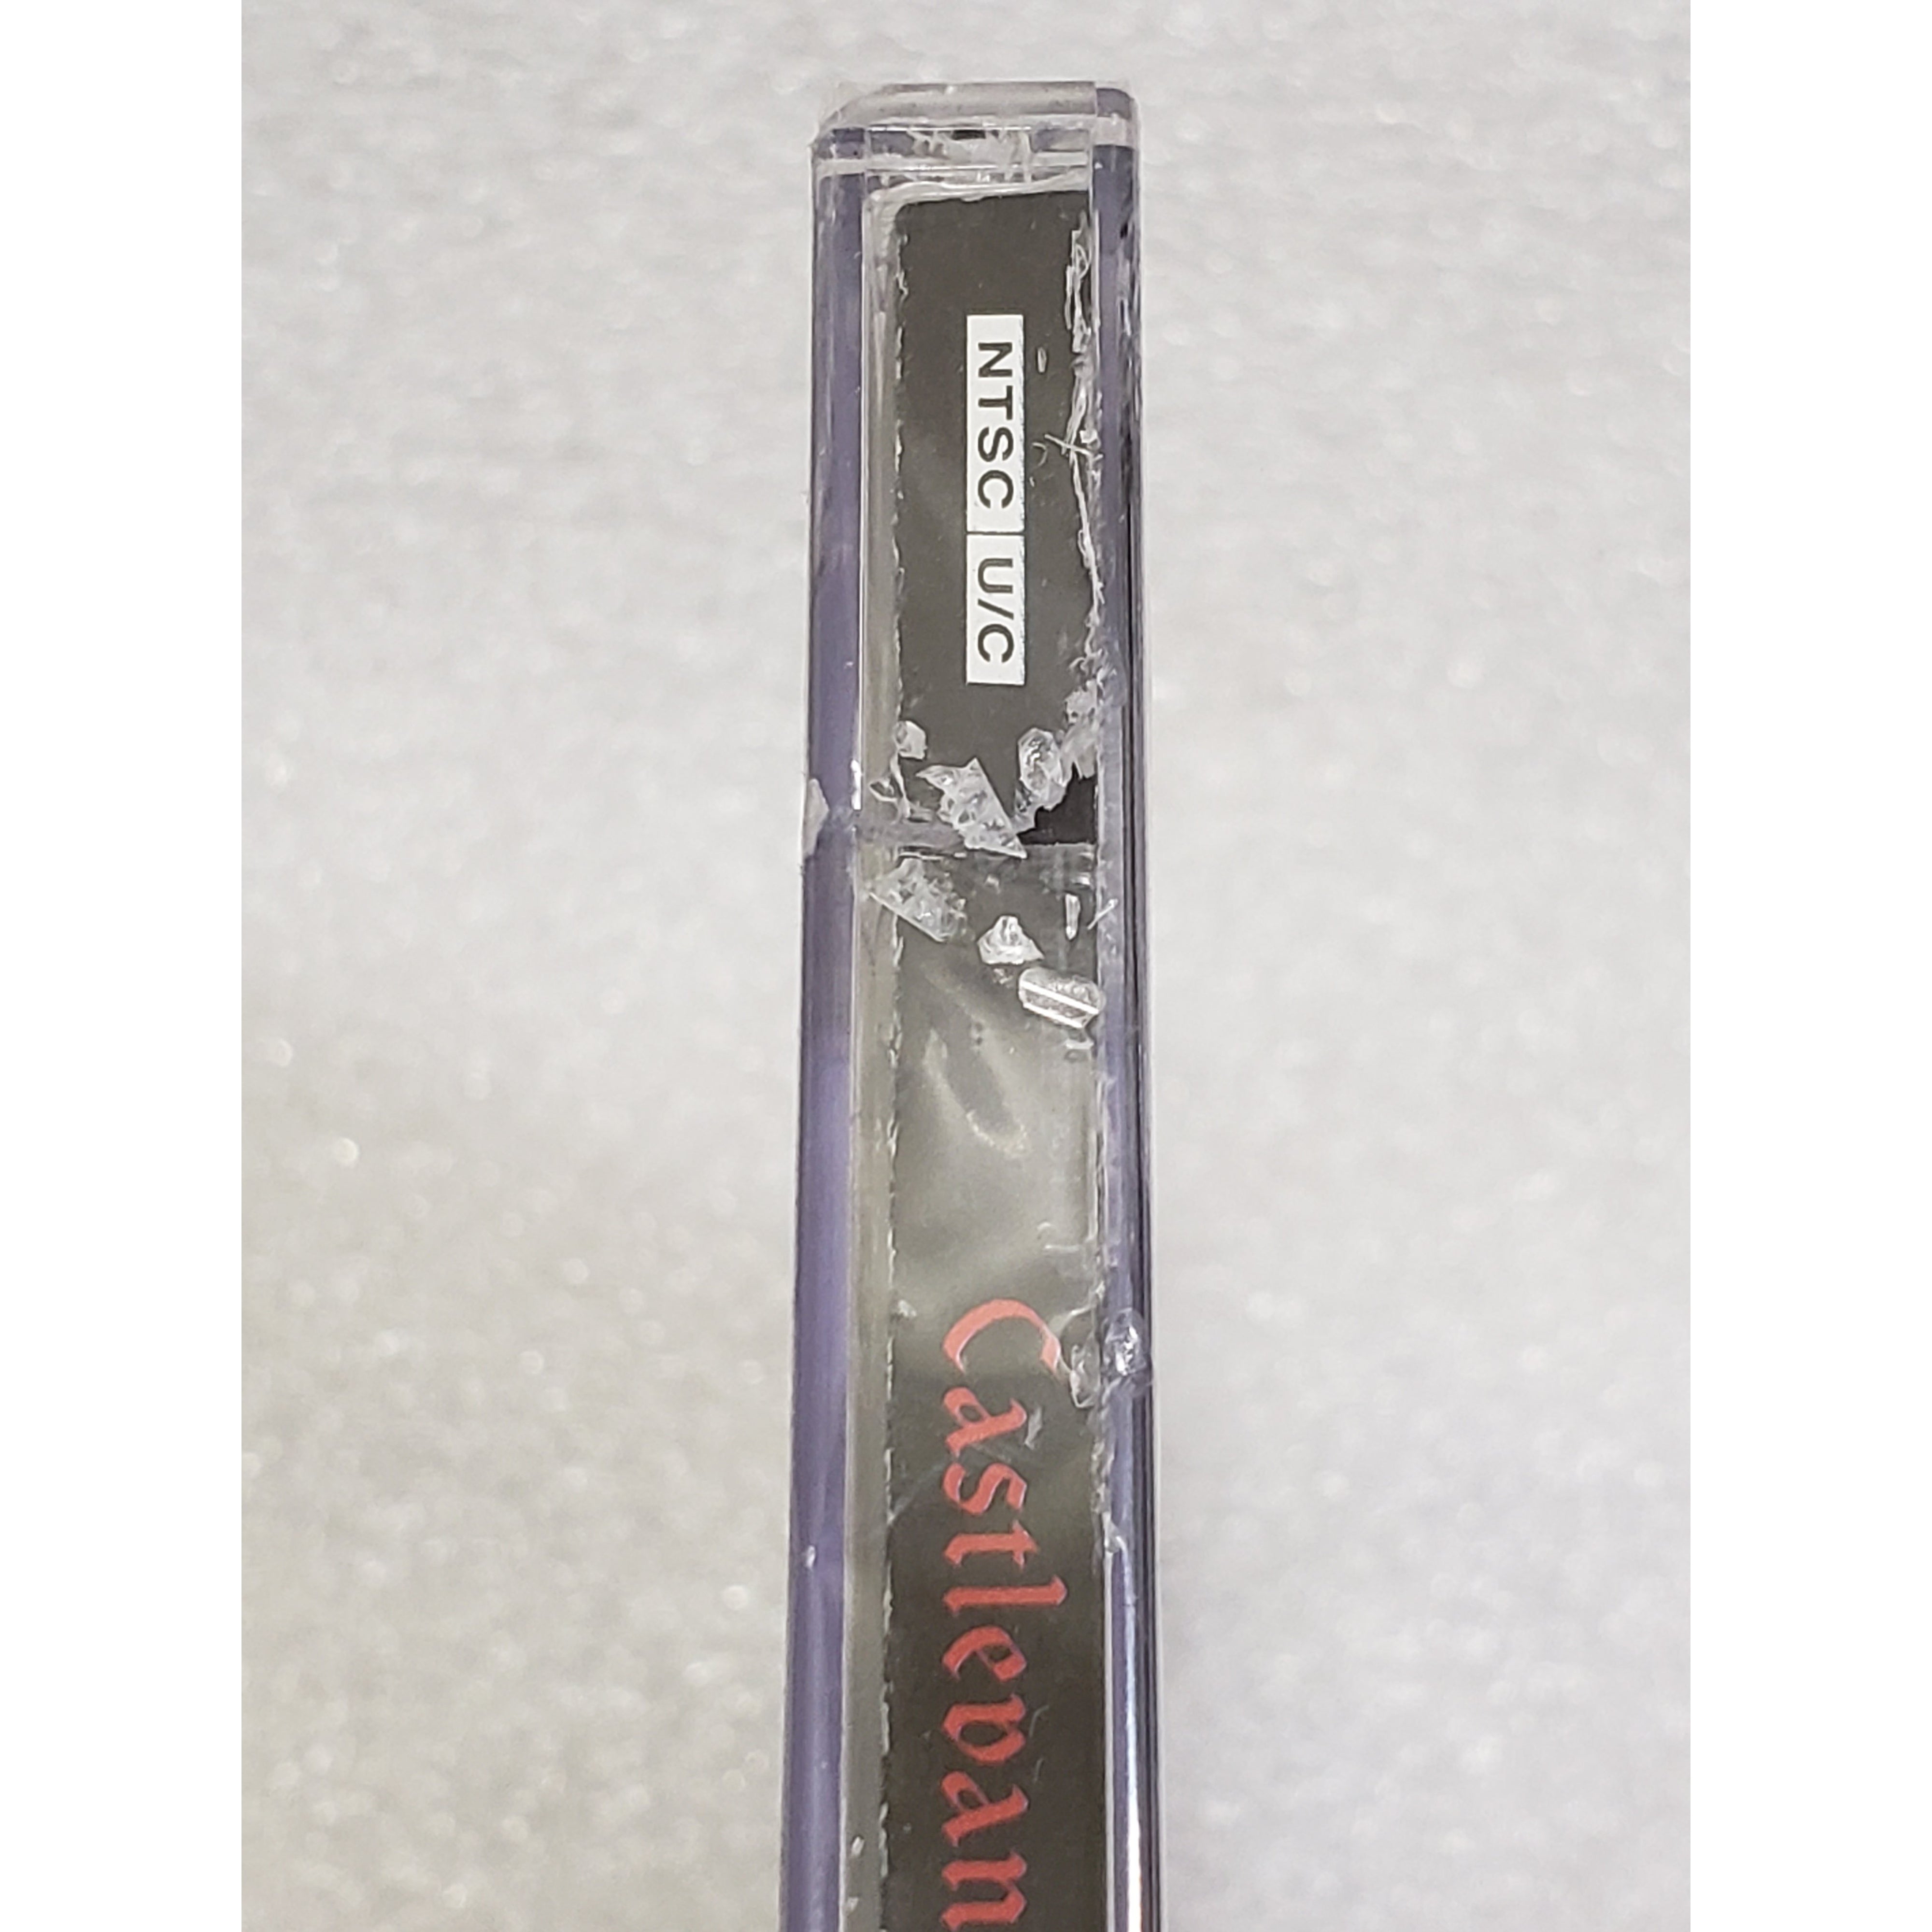 Castlevania Chronicles - PlayStation 1 (PS1) Game New (Unopened) - YourGamingShop.com - Buy, Sell, Trade Video Games Online. 120 Day Warranty. Satisfaction Guaranteed.